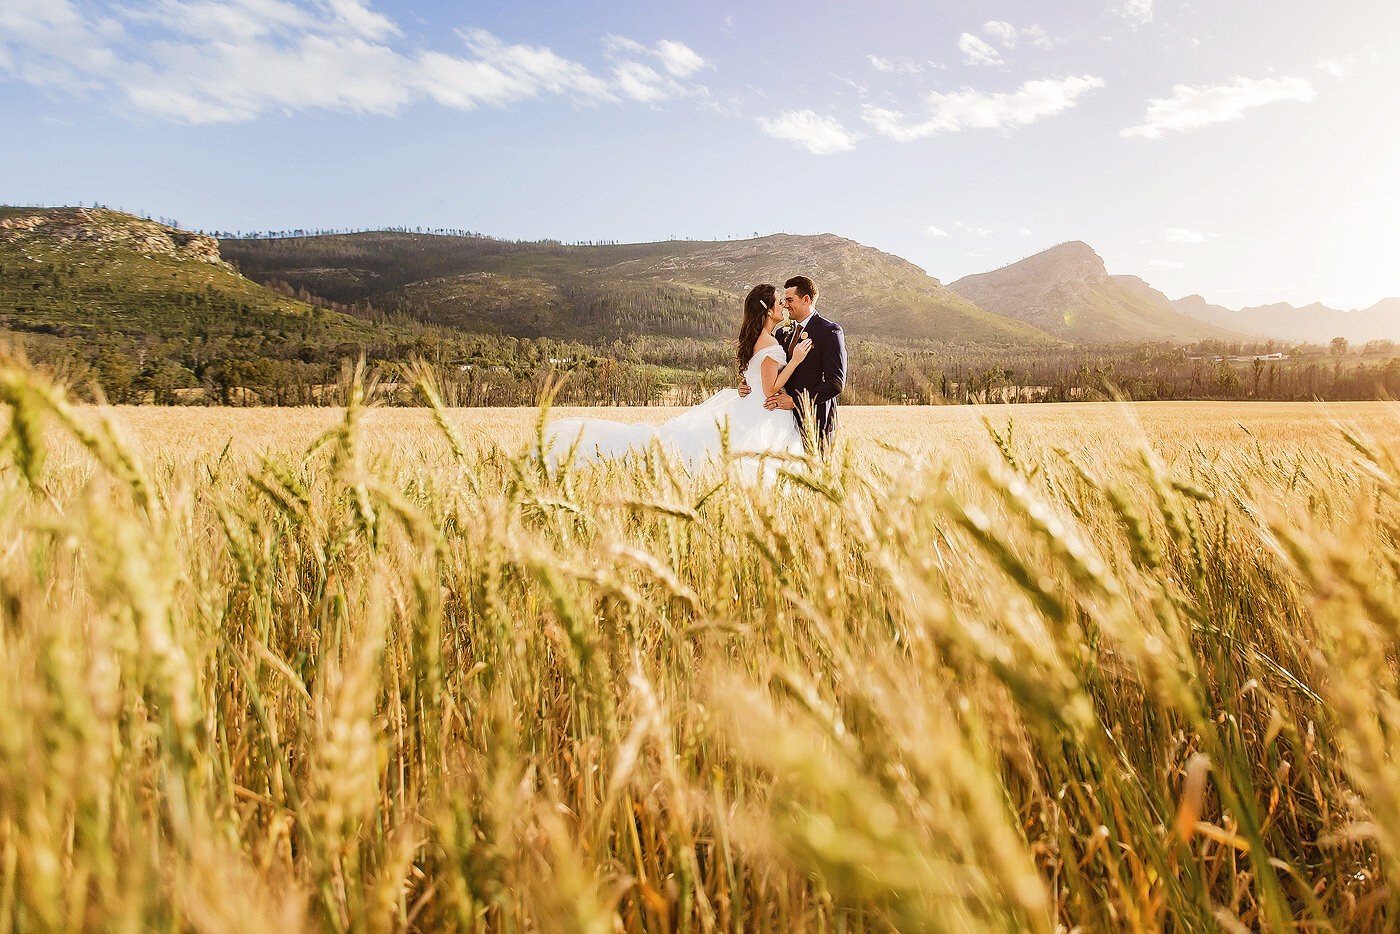 Bride and groom wedding photos in wheat field.